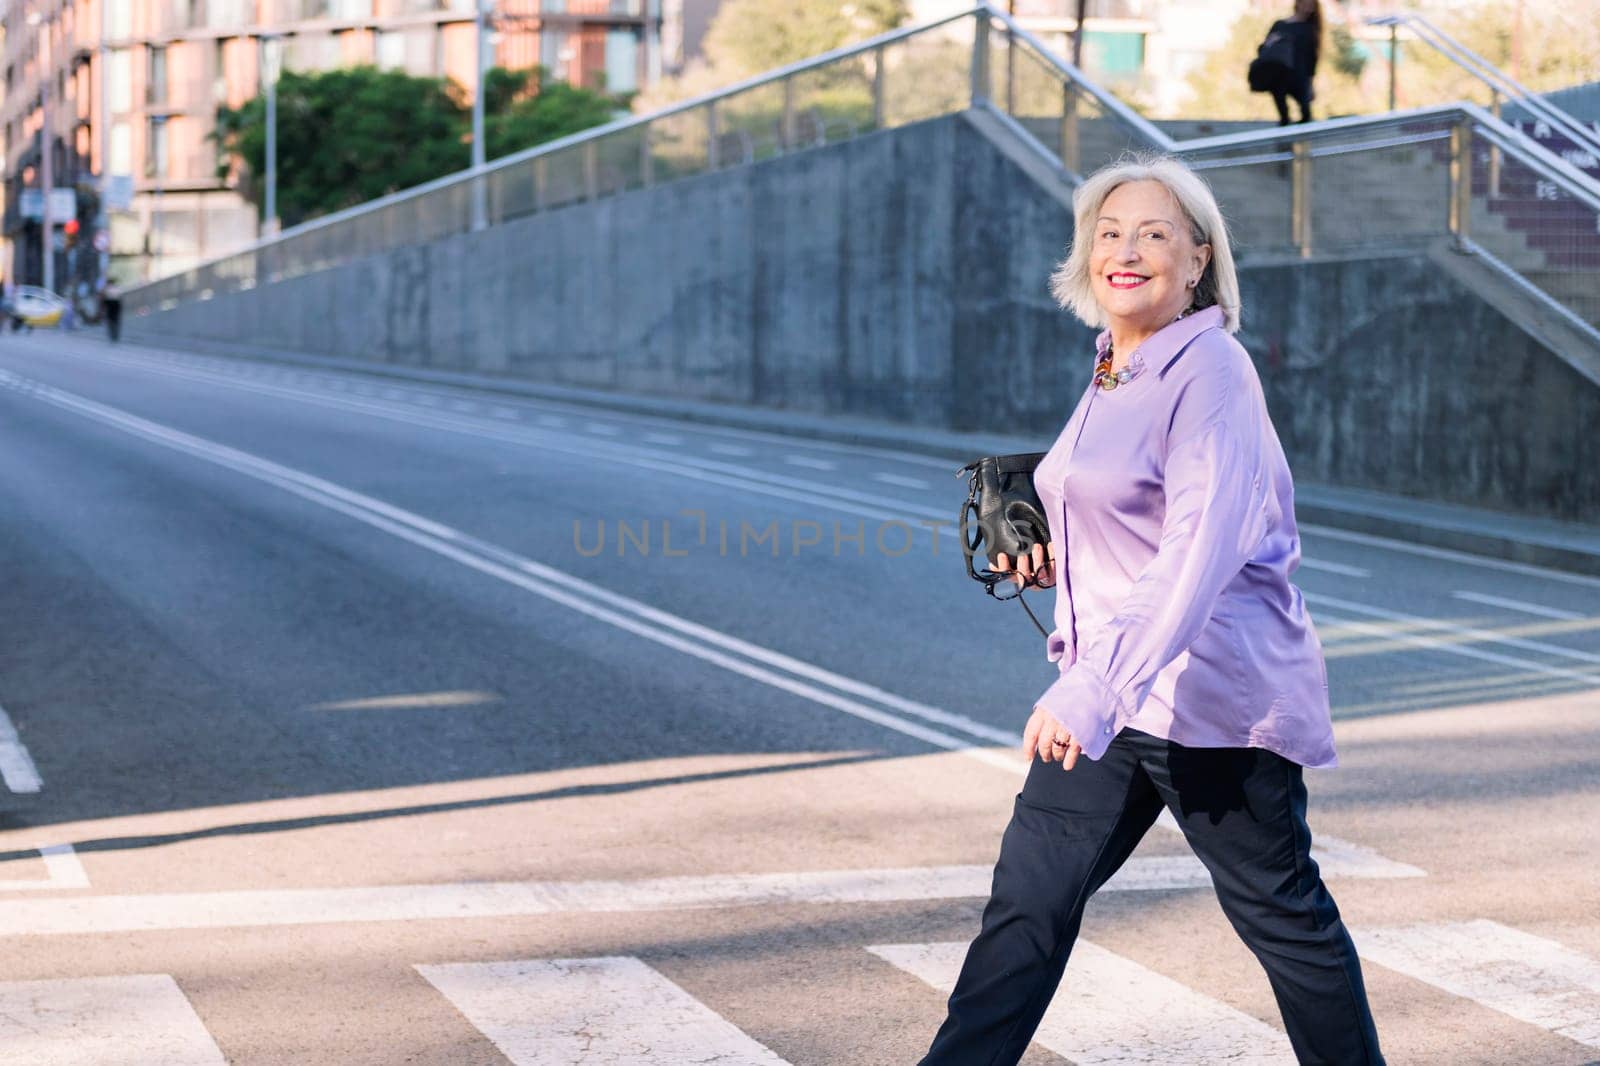 senior woman smiling happy crossing a city street by pedestrian crossing, concept of elderly people leisure and active lifestyle, copy space for text